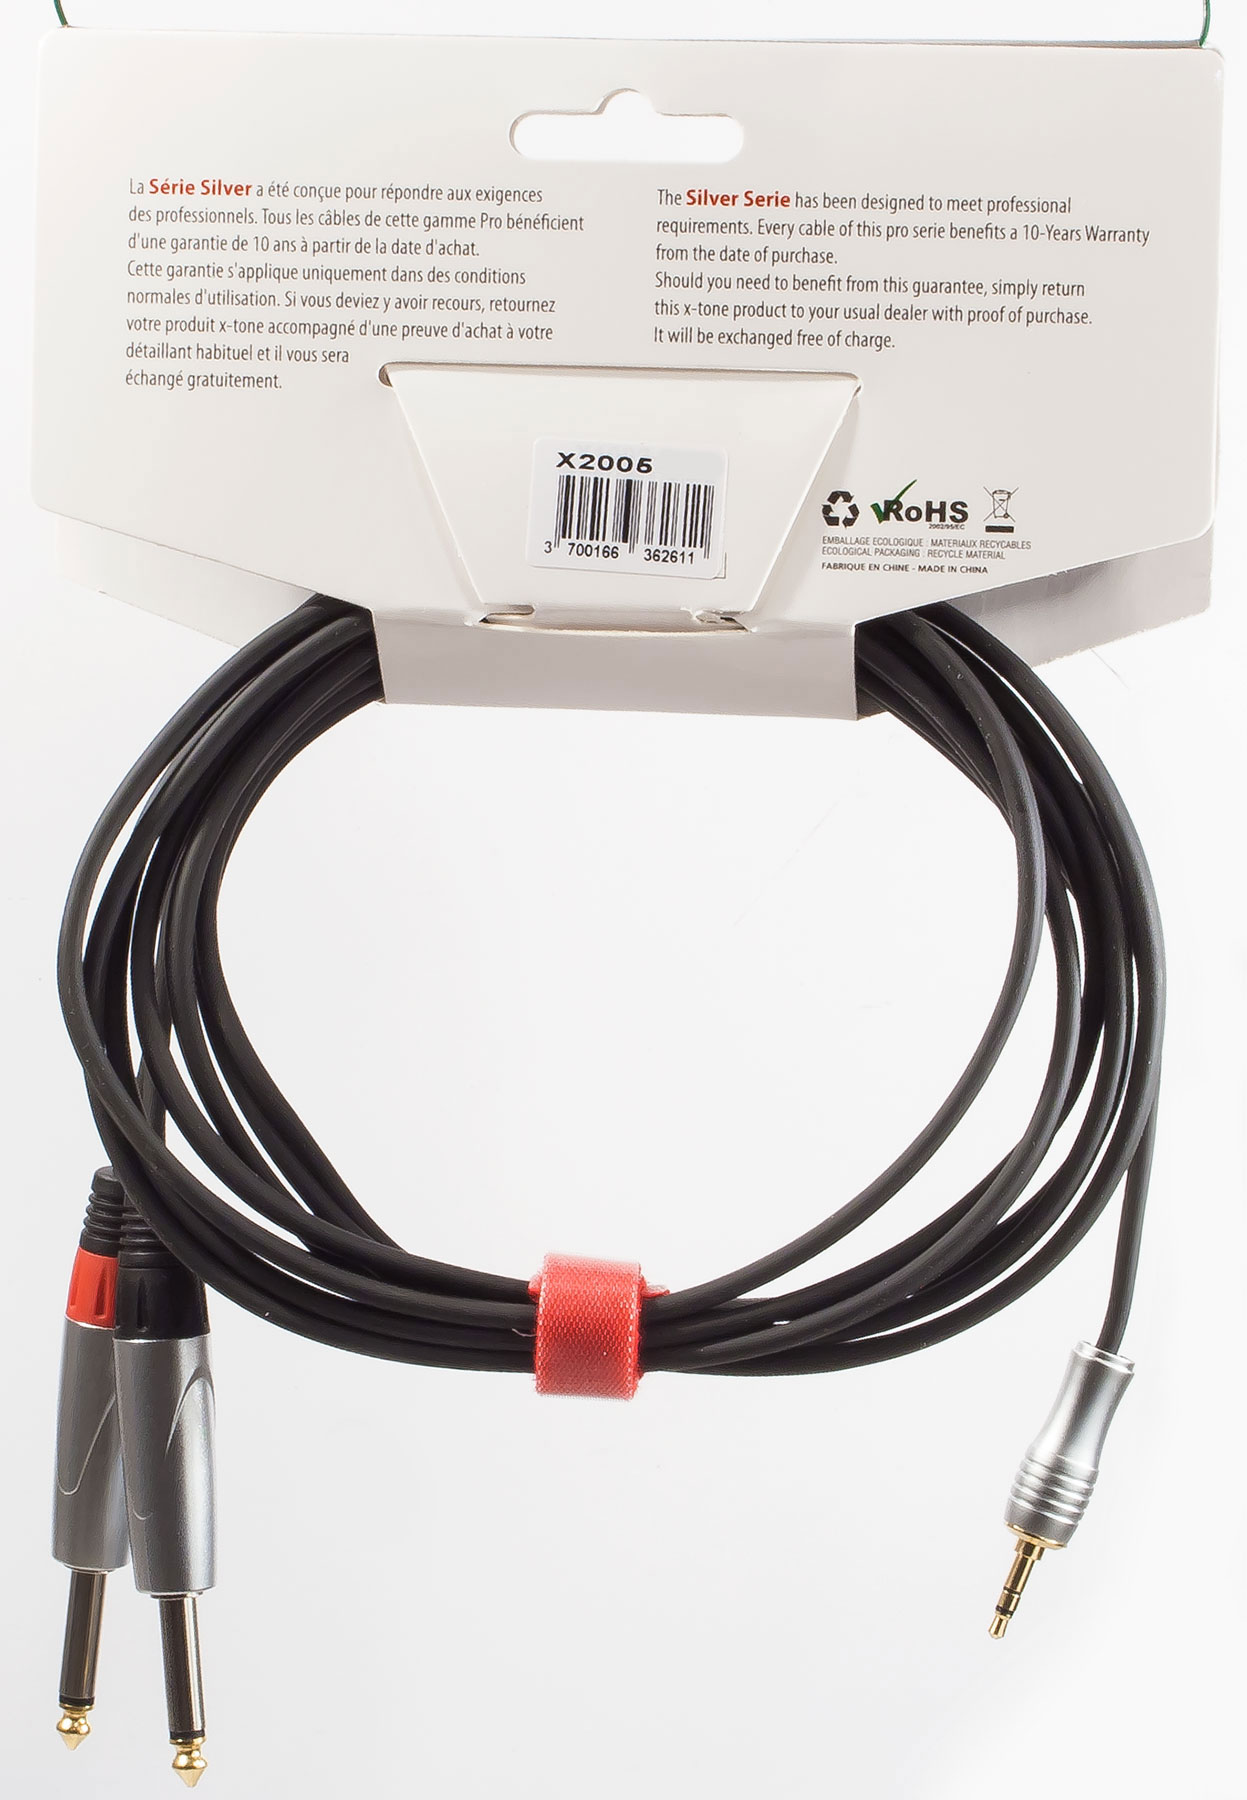 X-tone X2005-1.5m - Jack(m) 3,5 Stereo / 2 Jack(m) 6,35 Mono Silver Series - Cable - Variation 1